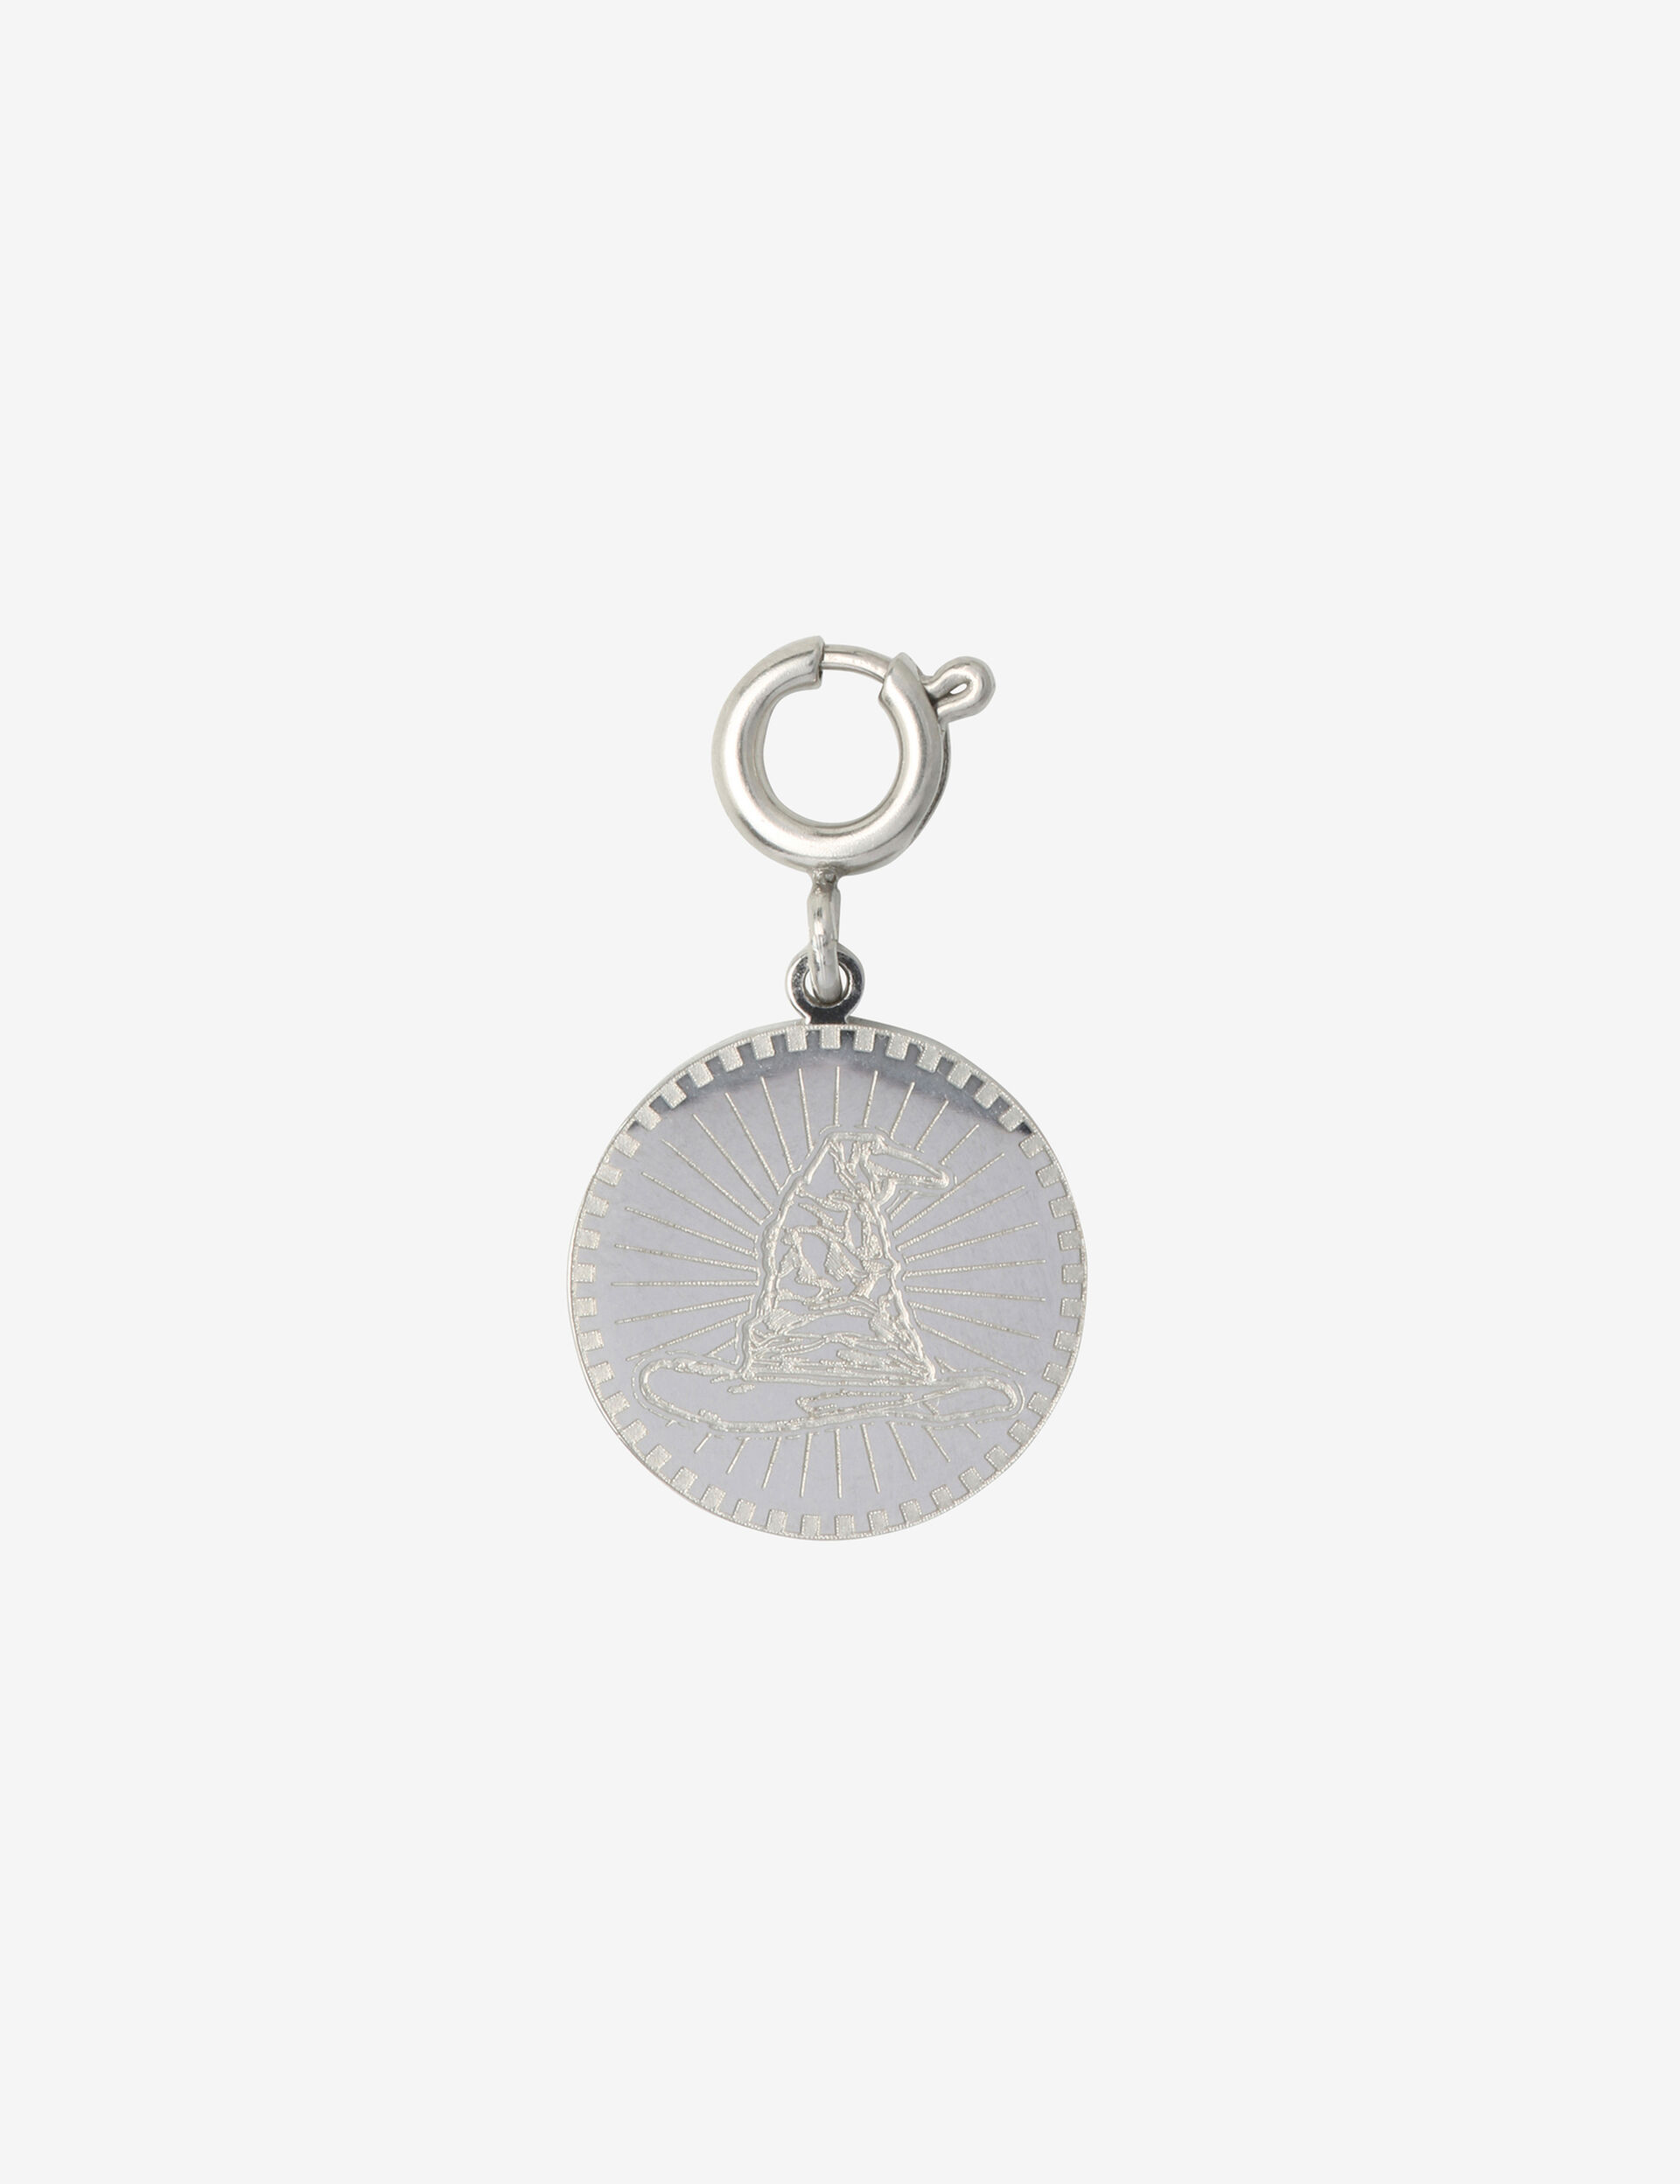 Harry Potter sorting hat coin charm